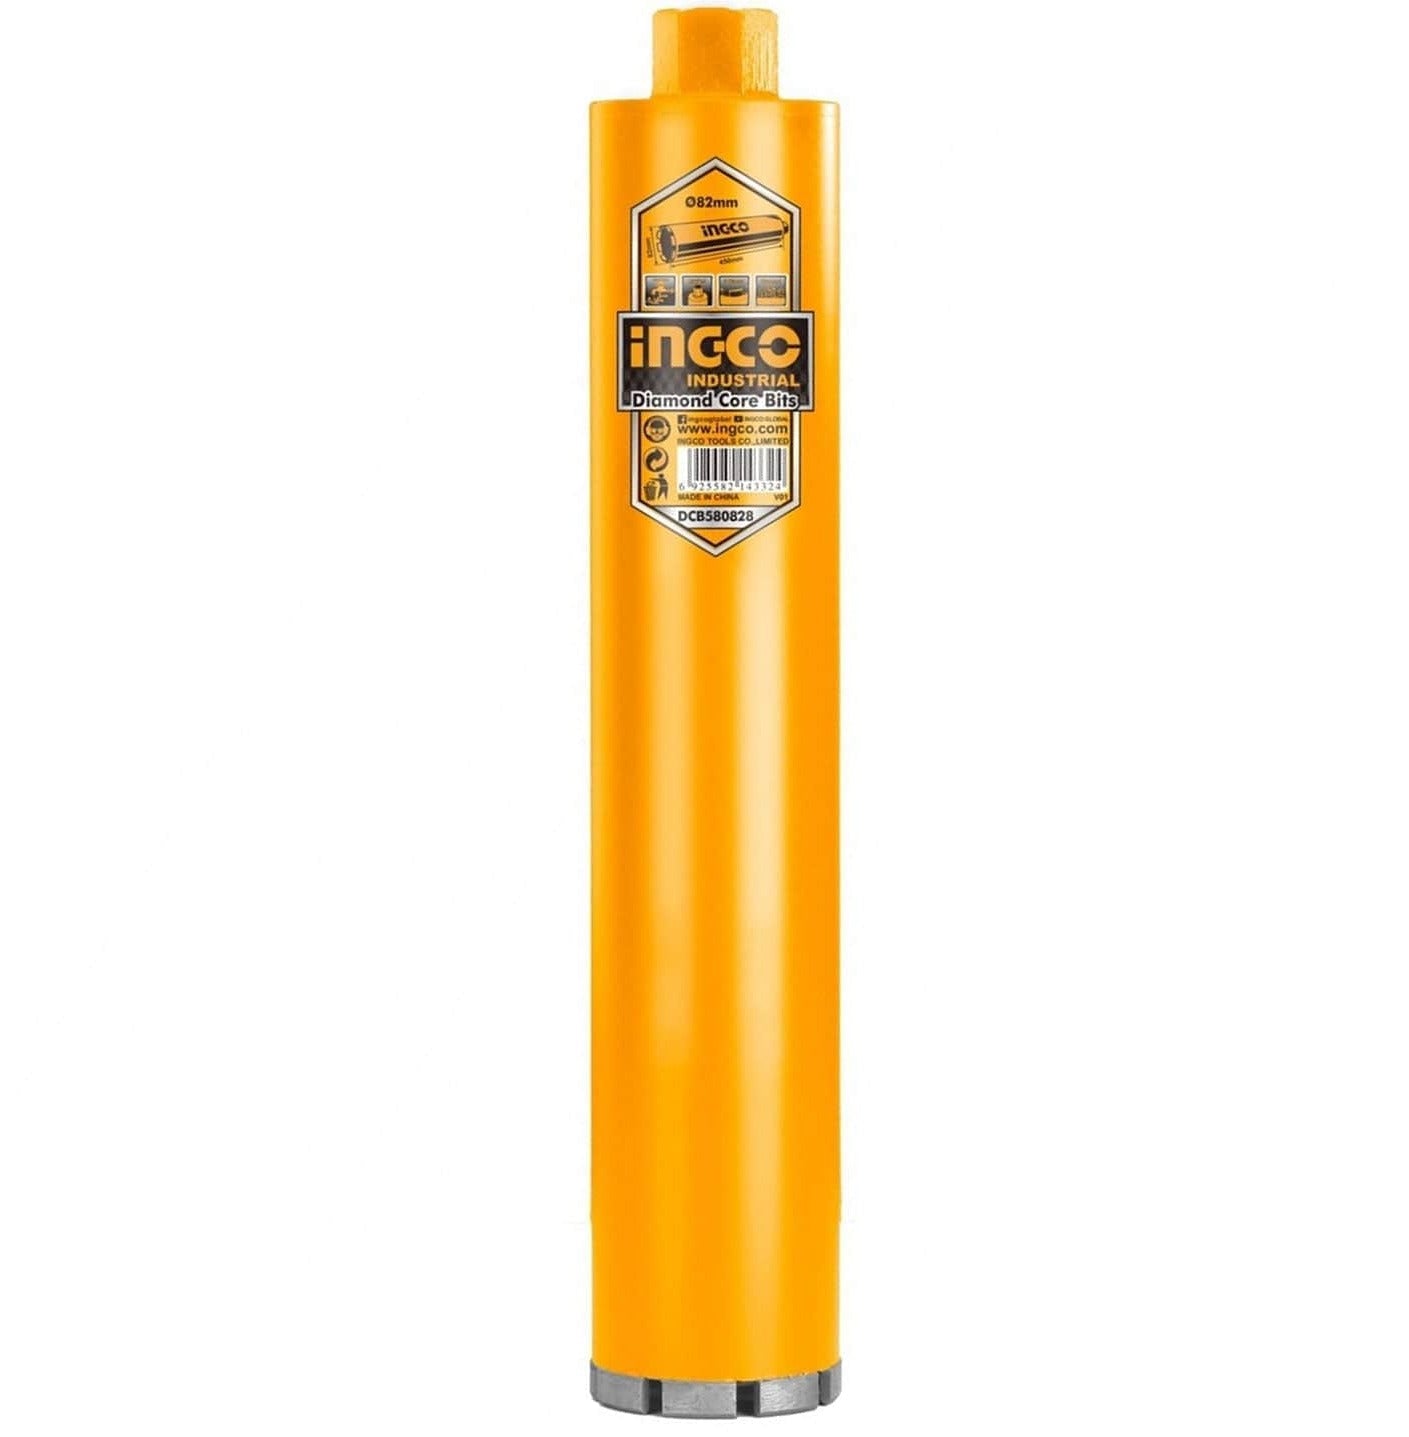 Ingco Diamond Core Bit - DCB581028, DCB581228 & DCB581528 | Supply Master | Accra, Ghana Hole Saws & Cores Buy Tools hardware Building materials